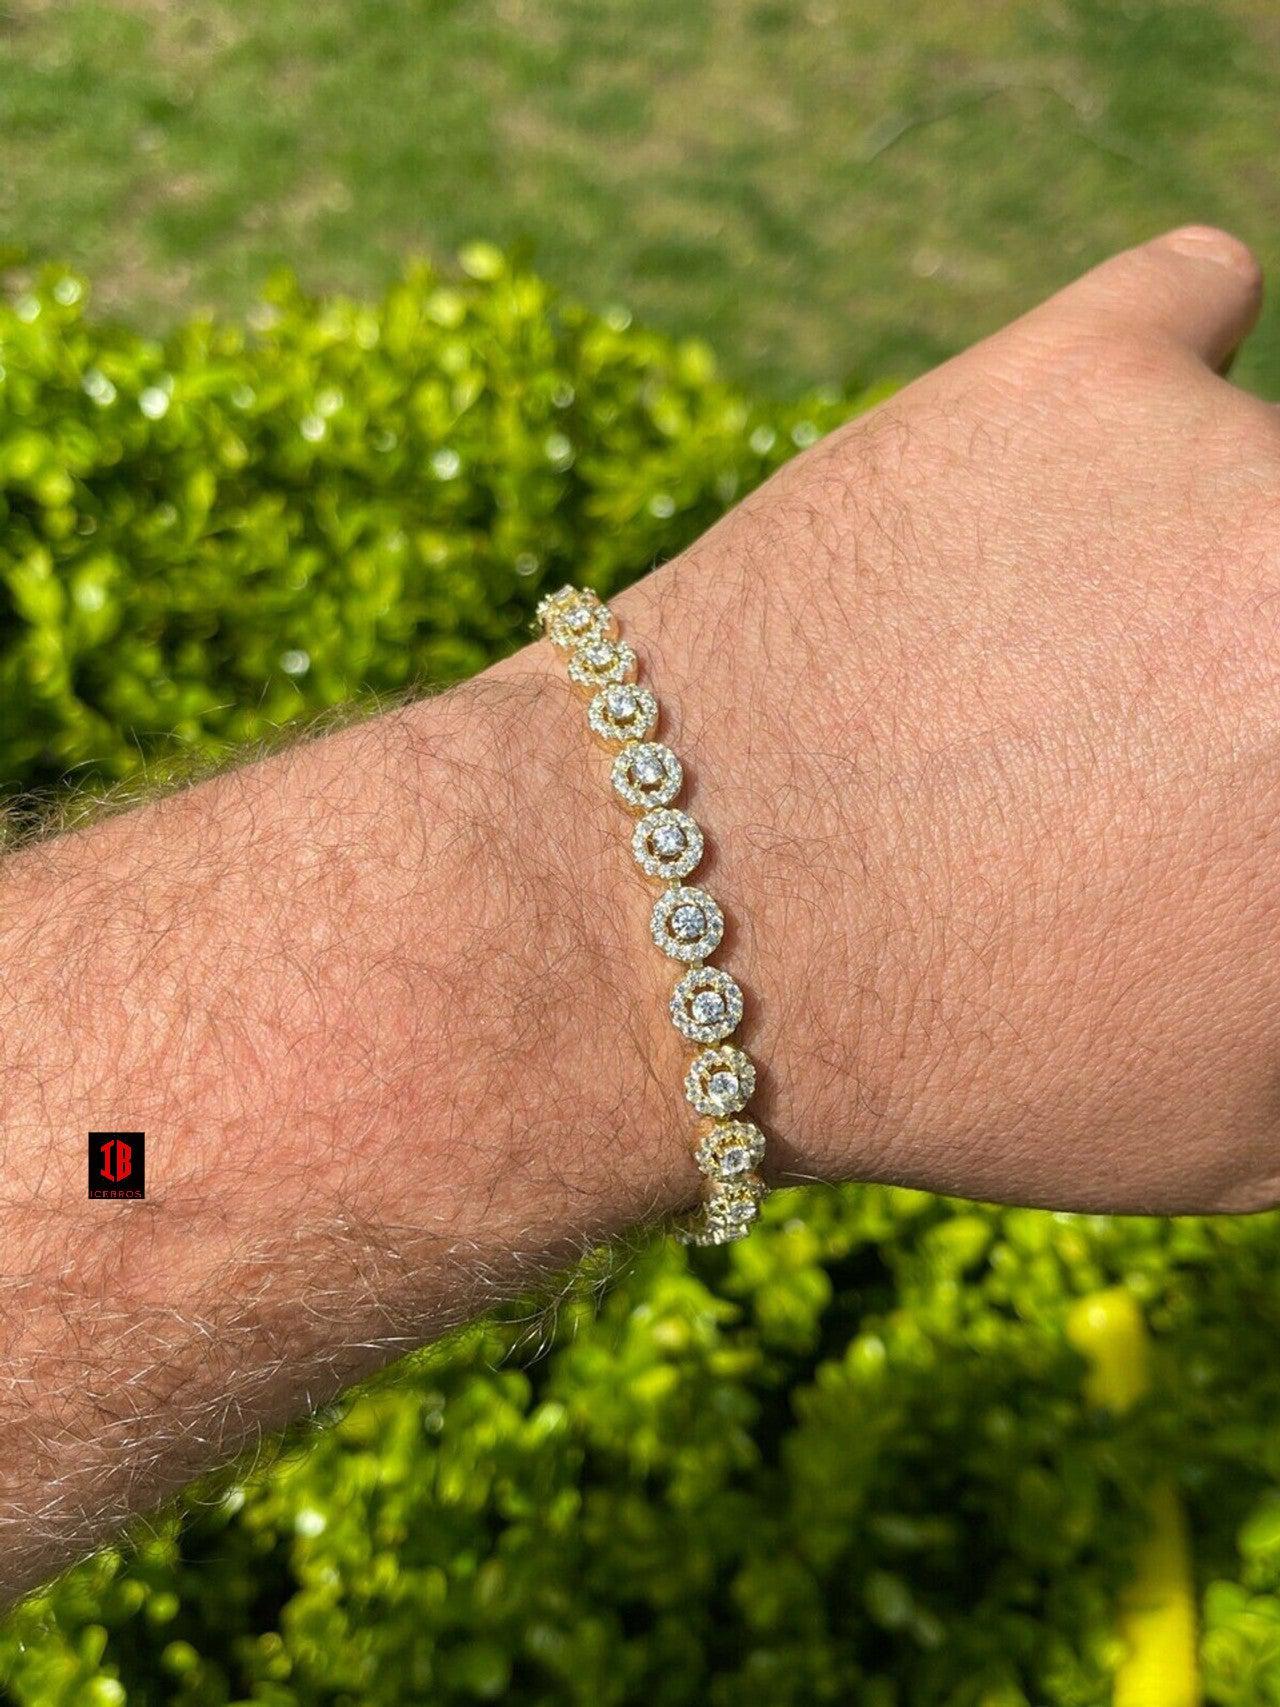 YELLOW GOLD Solid 925 Sterling Silver Tennis Bracelet Real Iced Flooded Out Diamond 7-8.5"